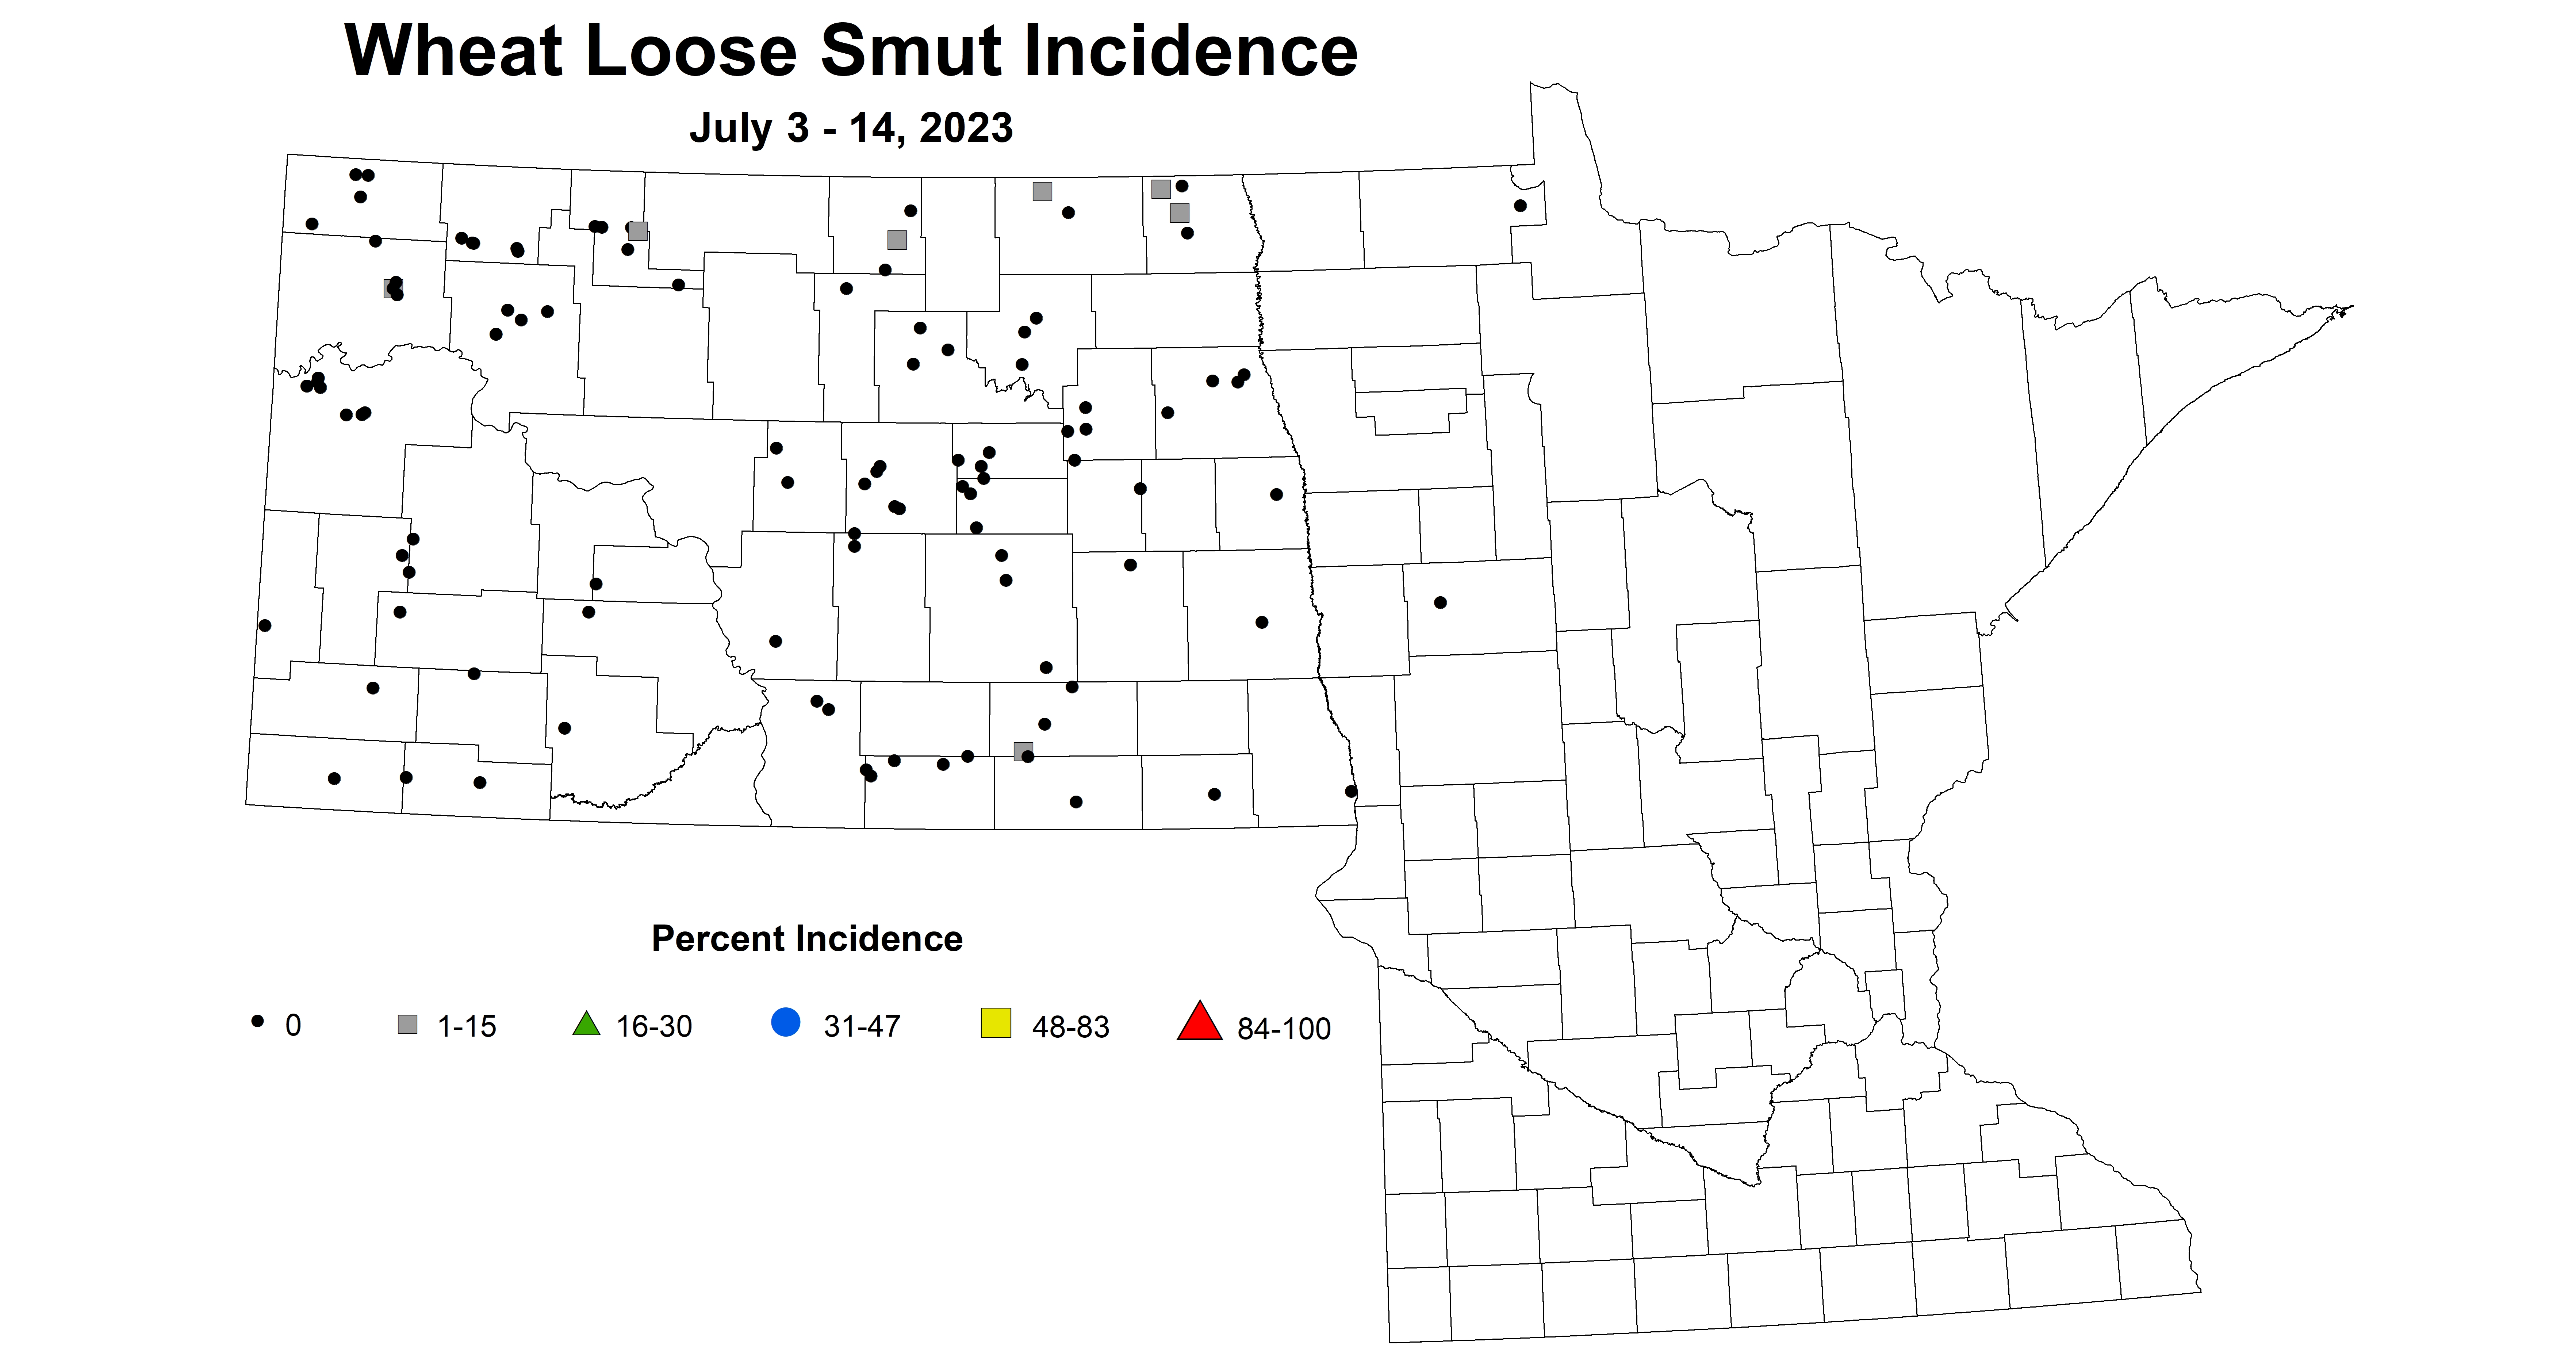 wheat loose smut incidence July 3-14 2023